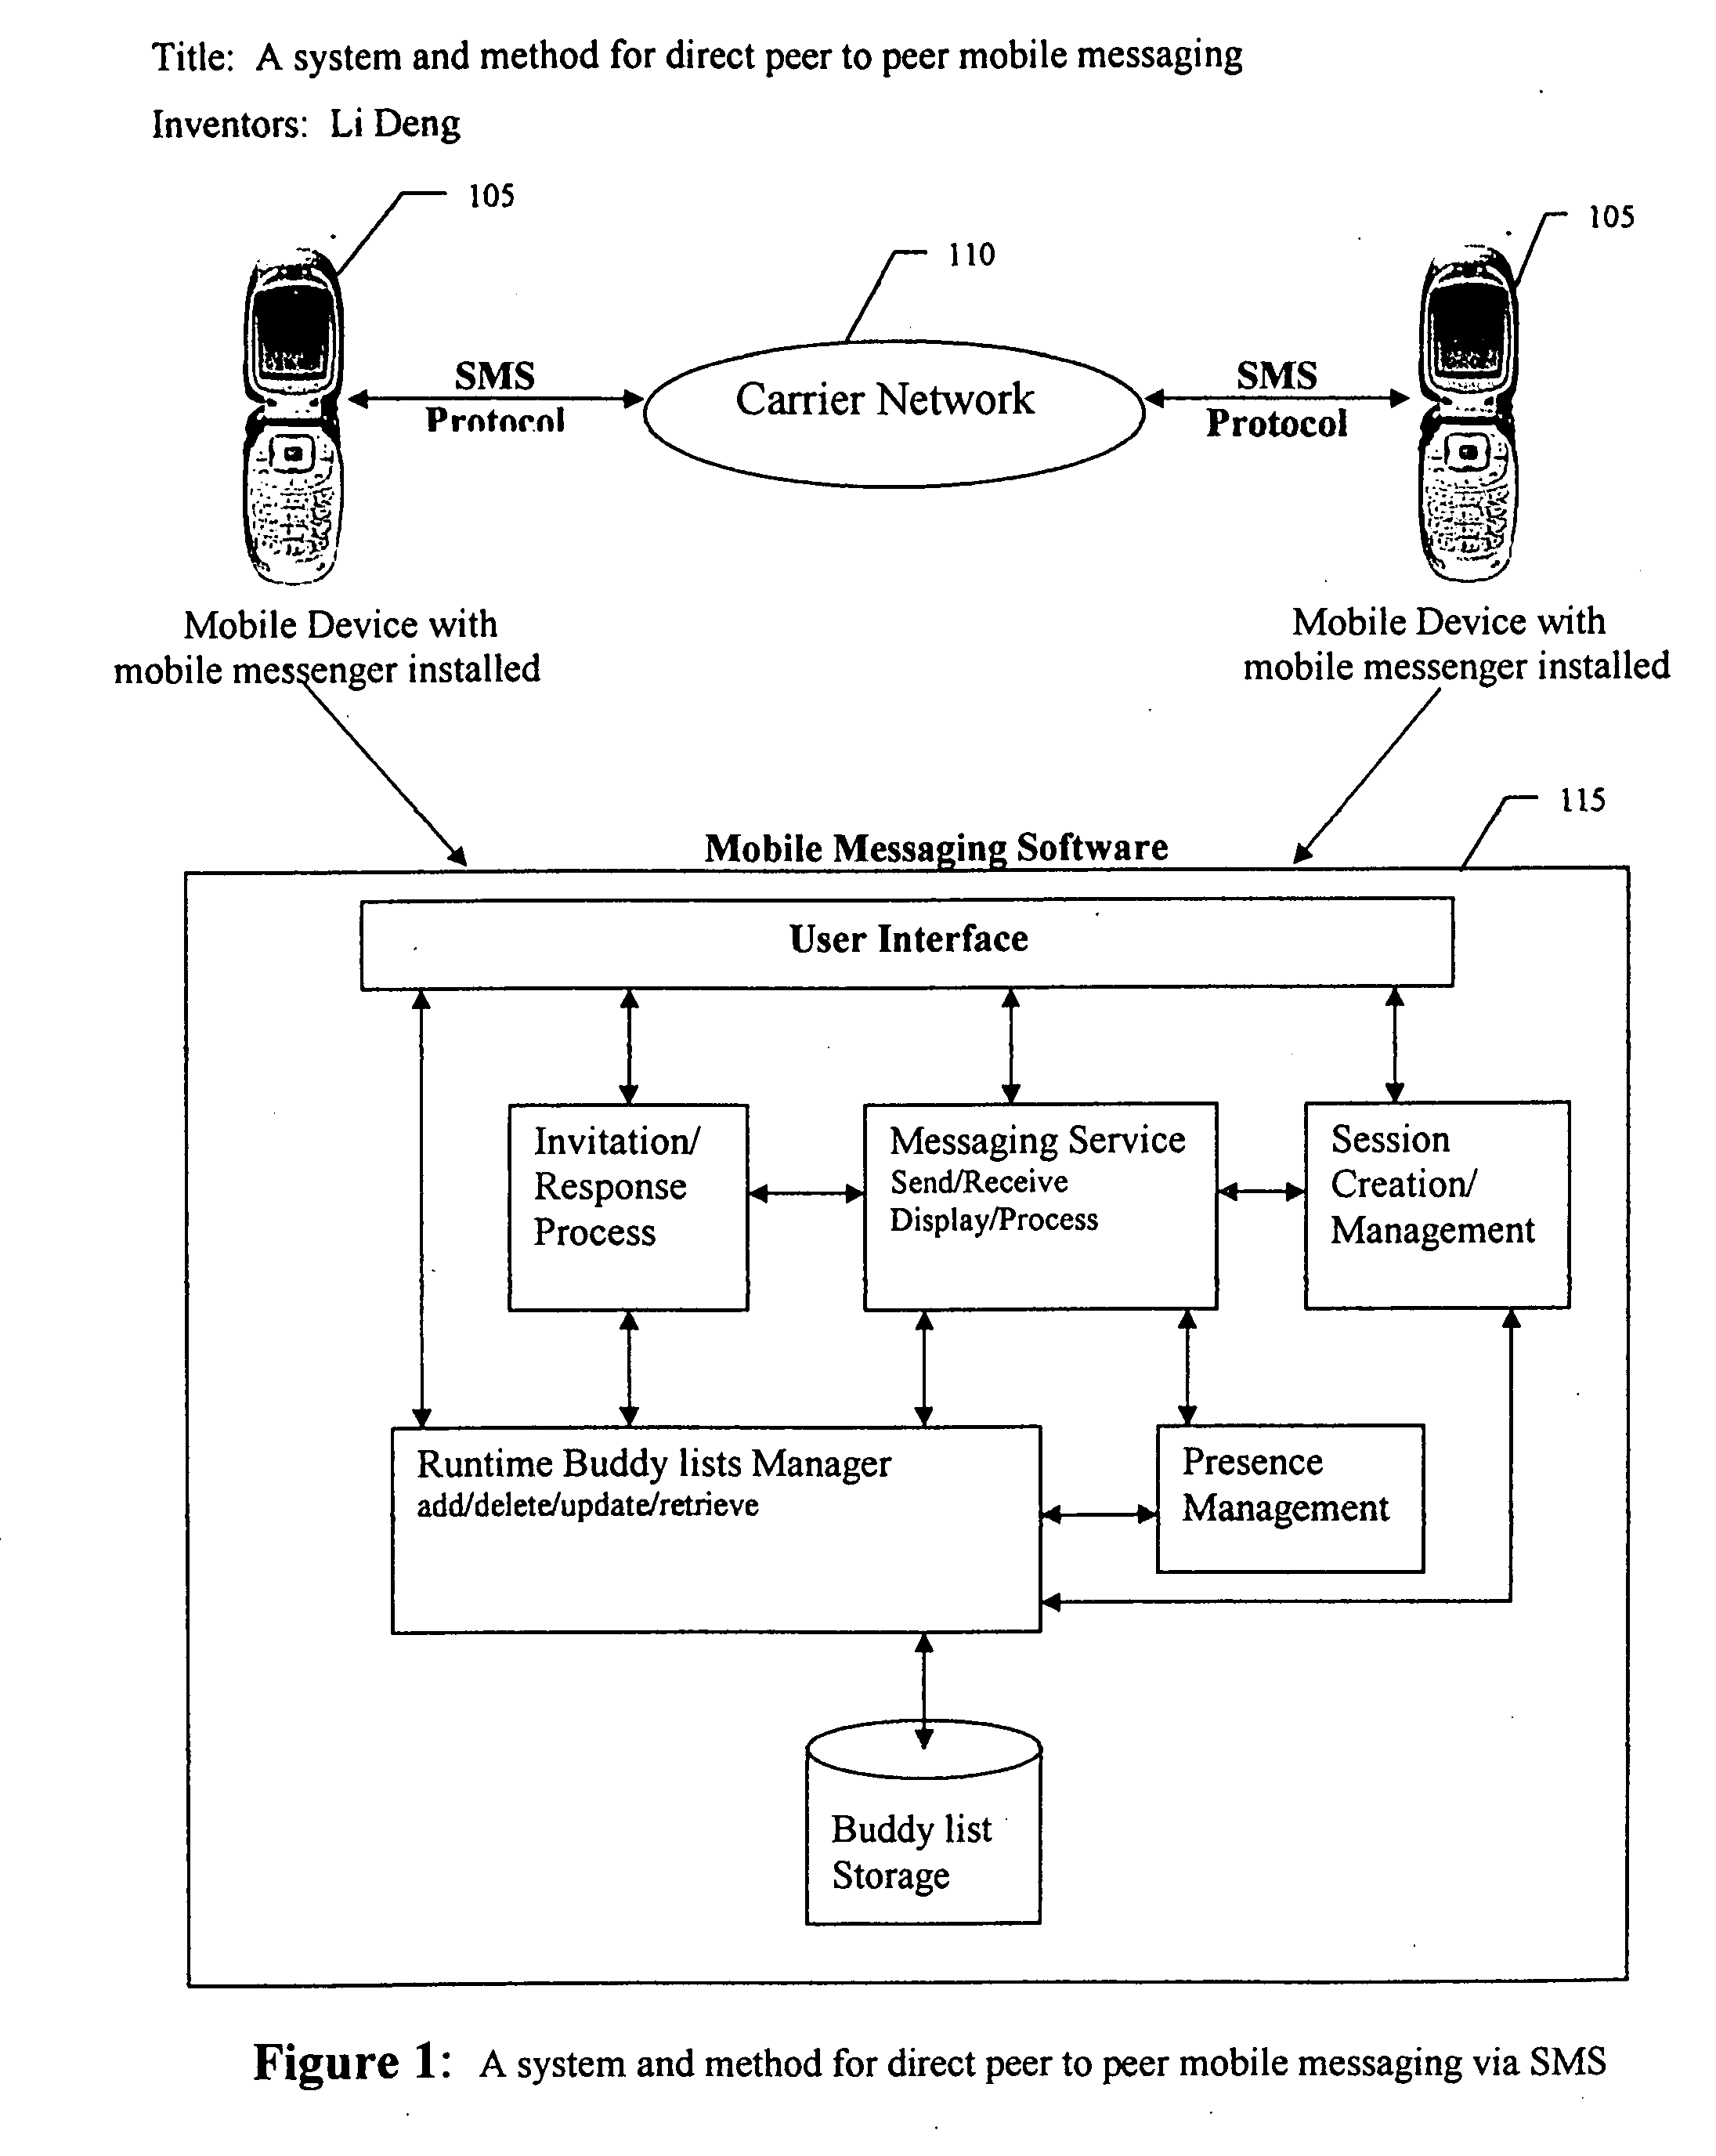 System and method for direct peer to peer mobile messaging